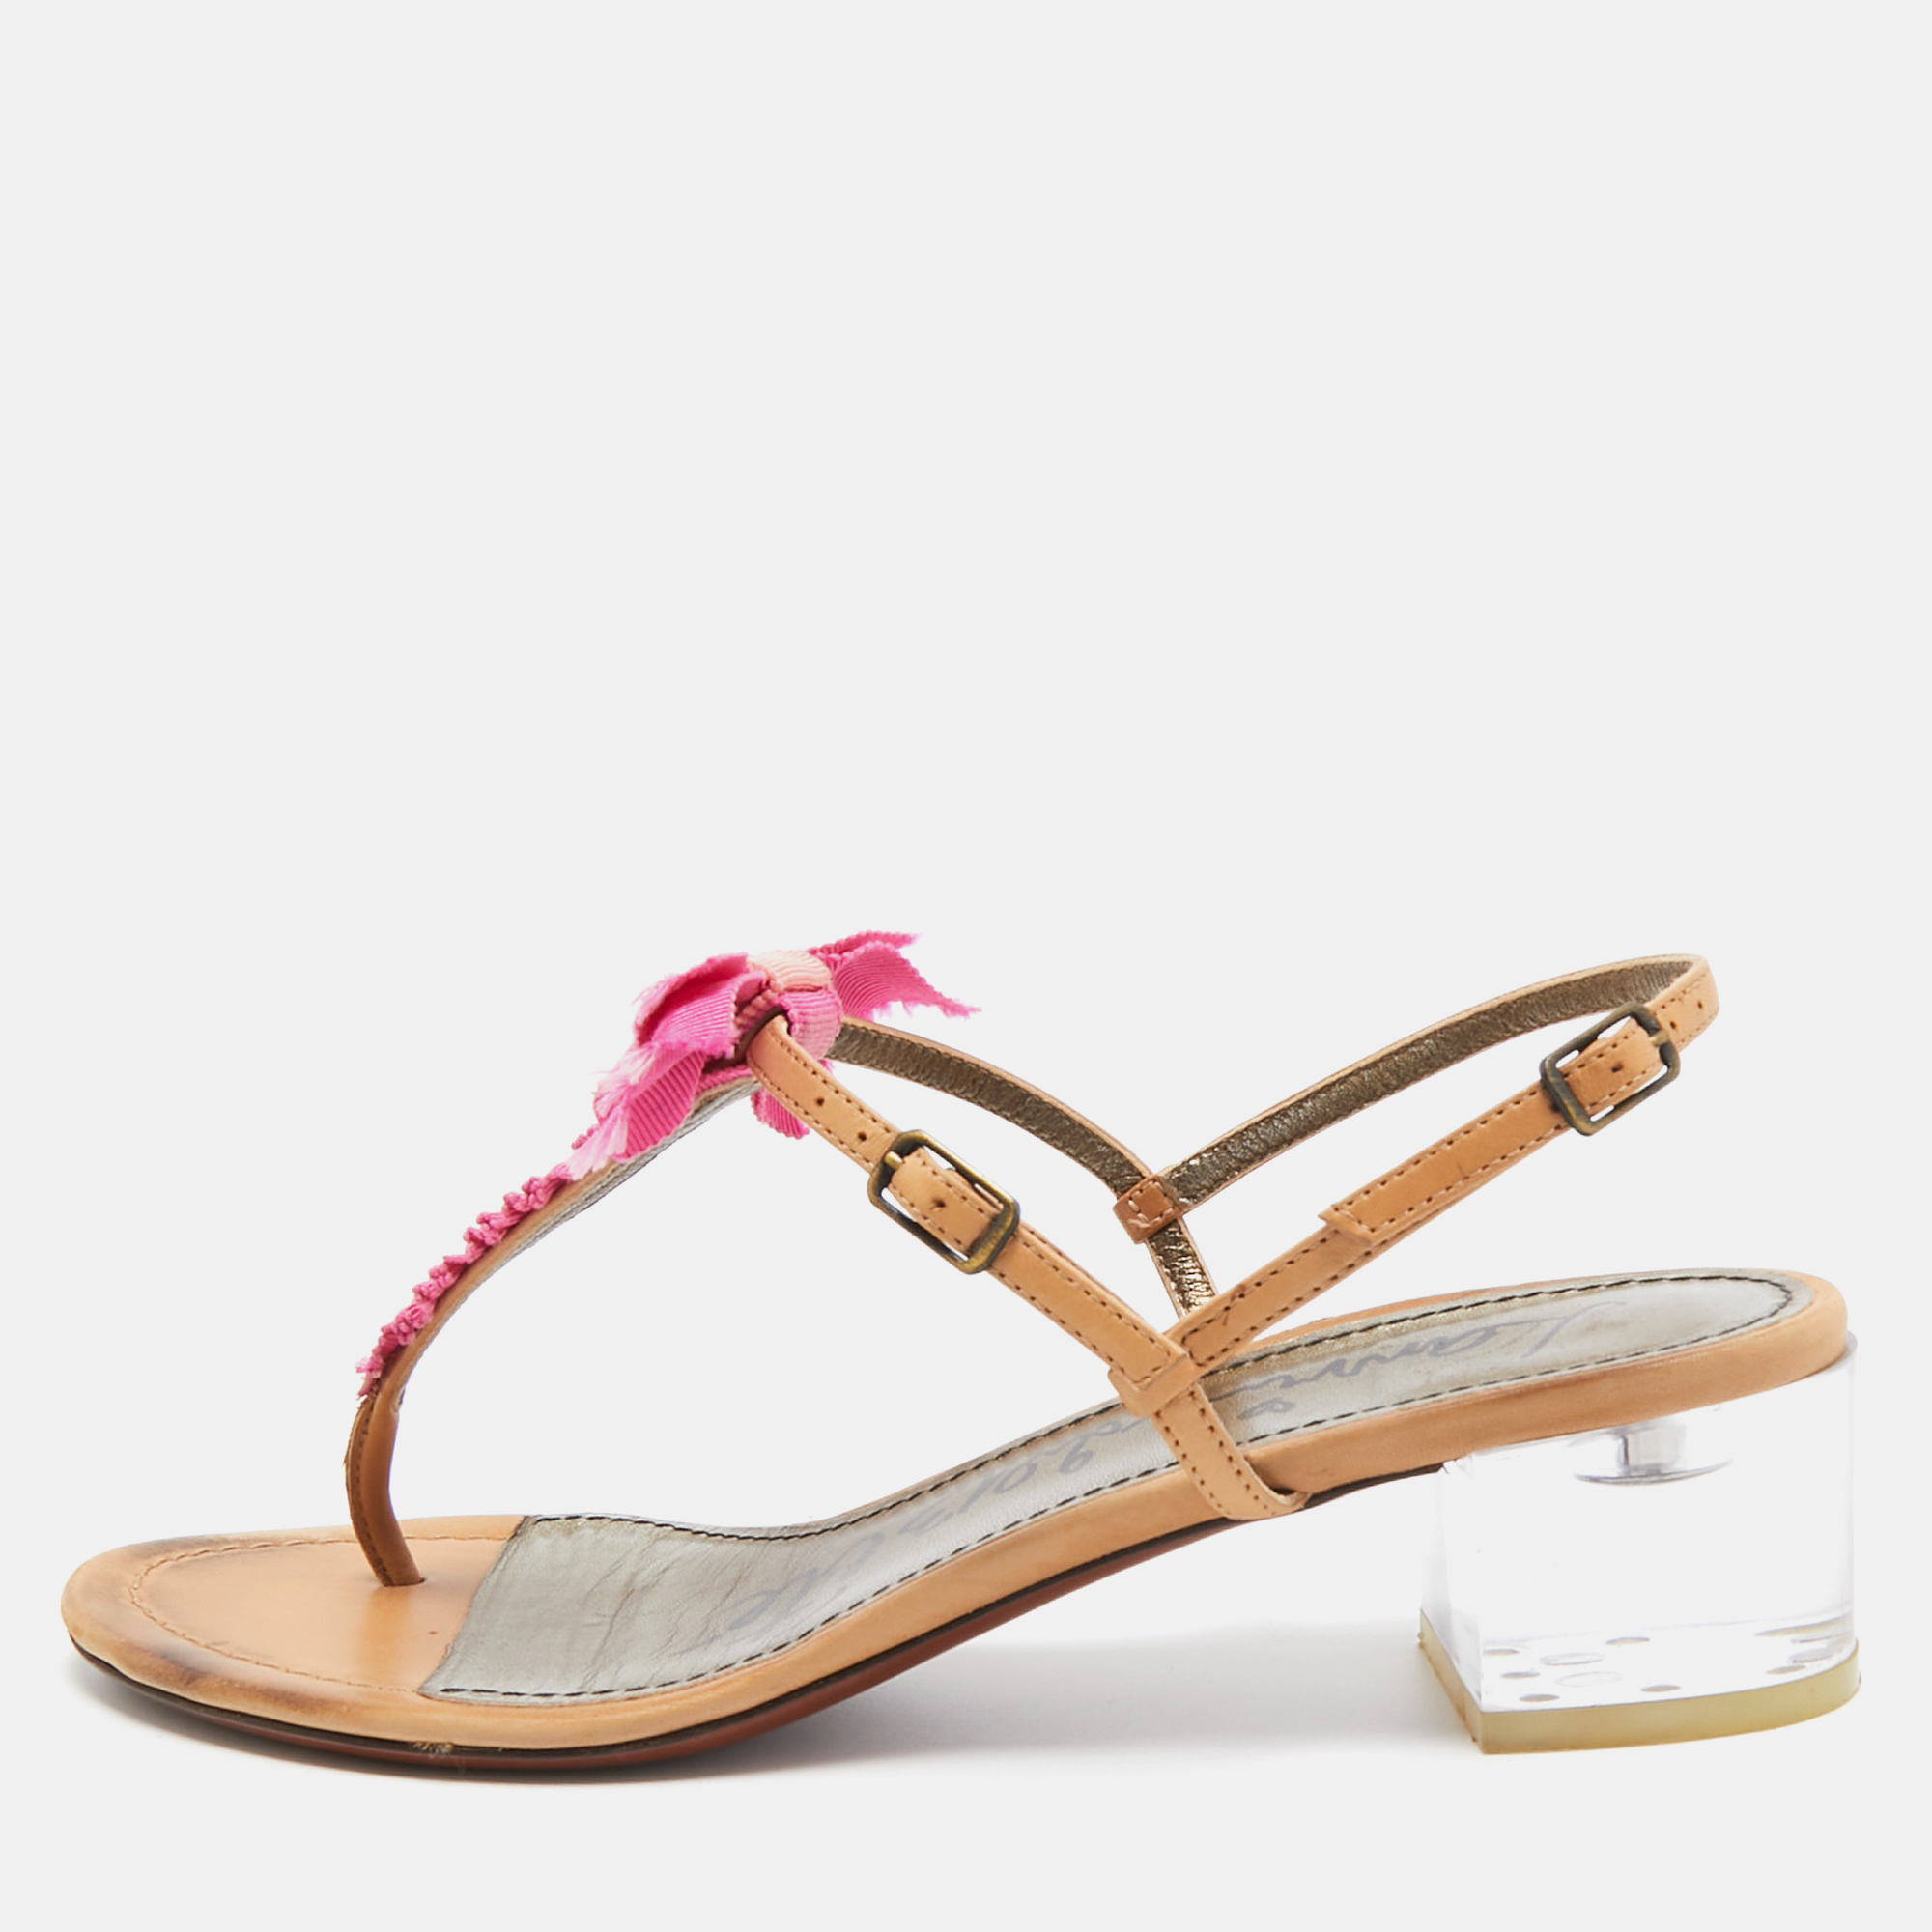 Lanvin light brown/pink leather and fabric bow thong ankle strap sandals size 37